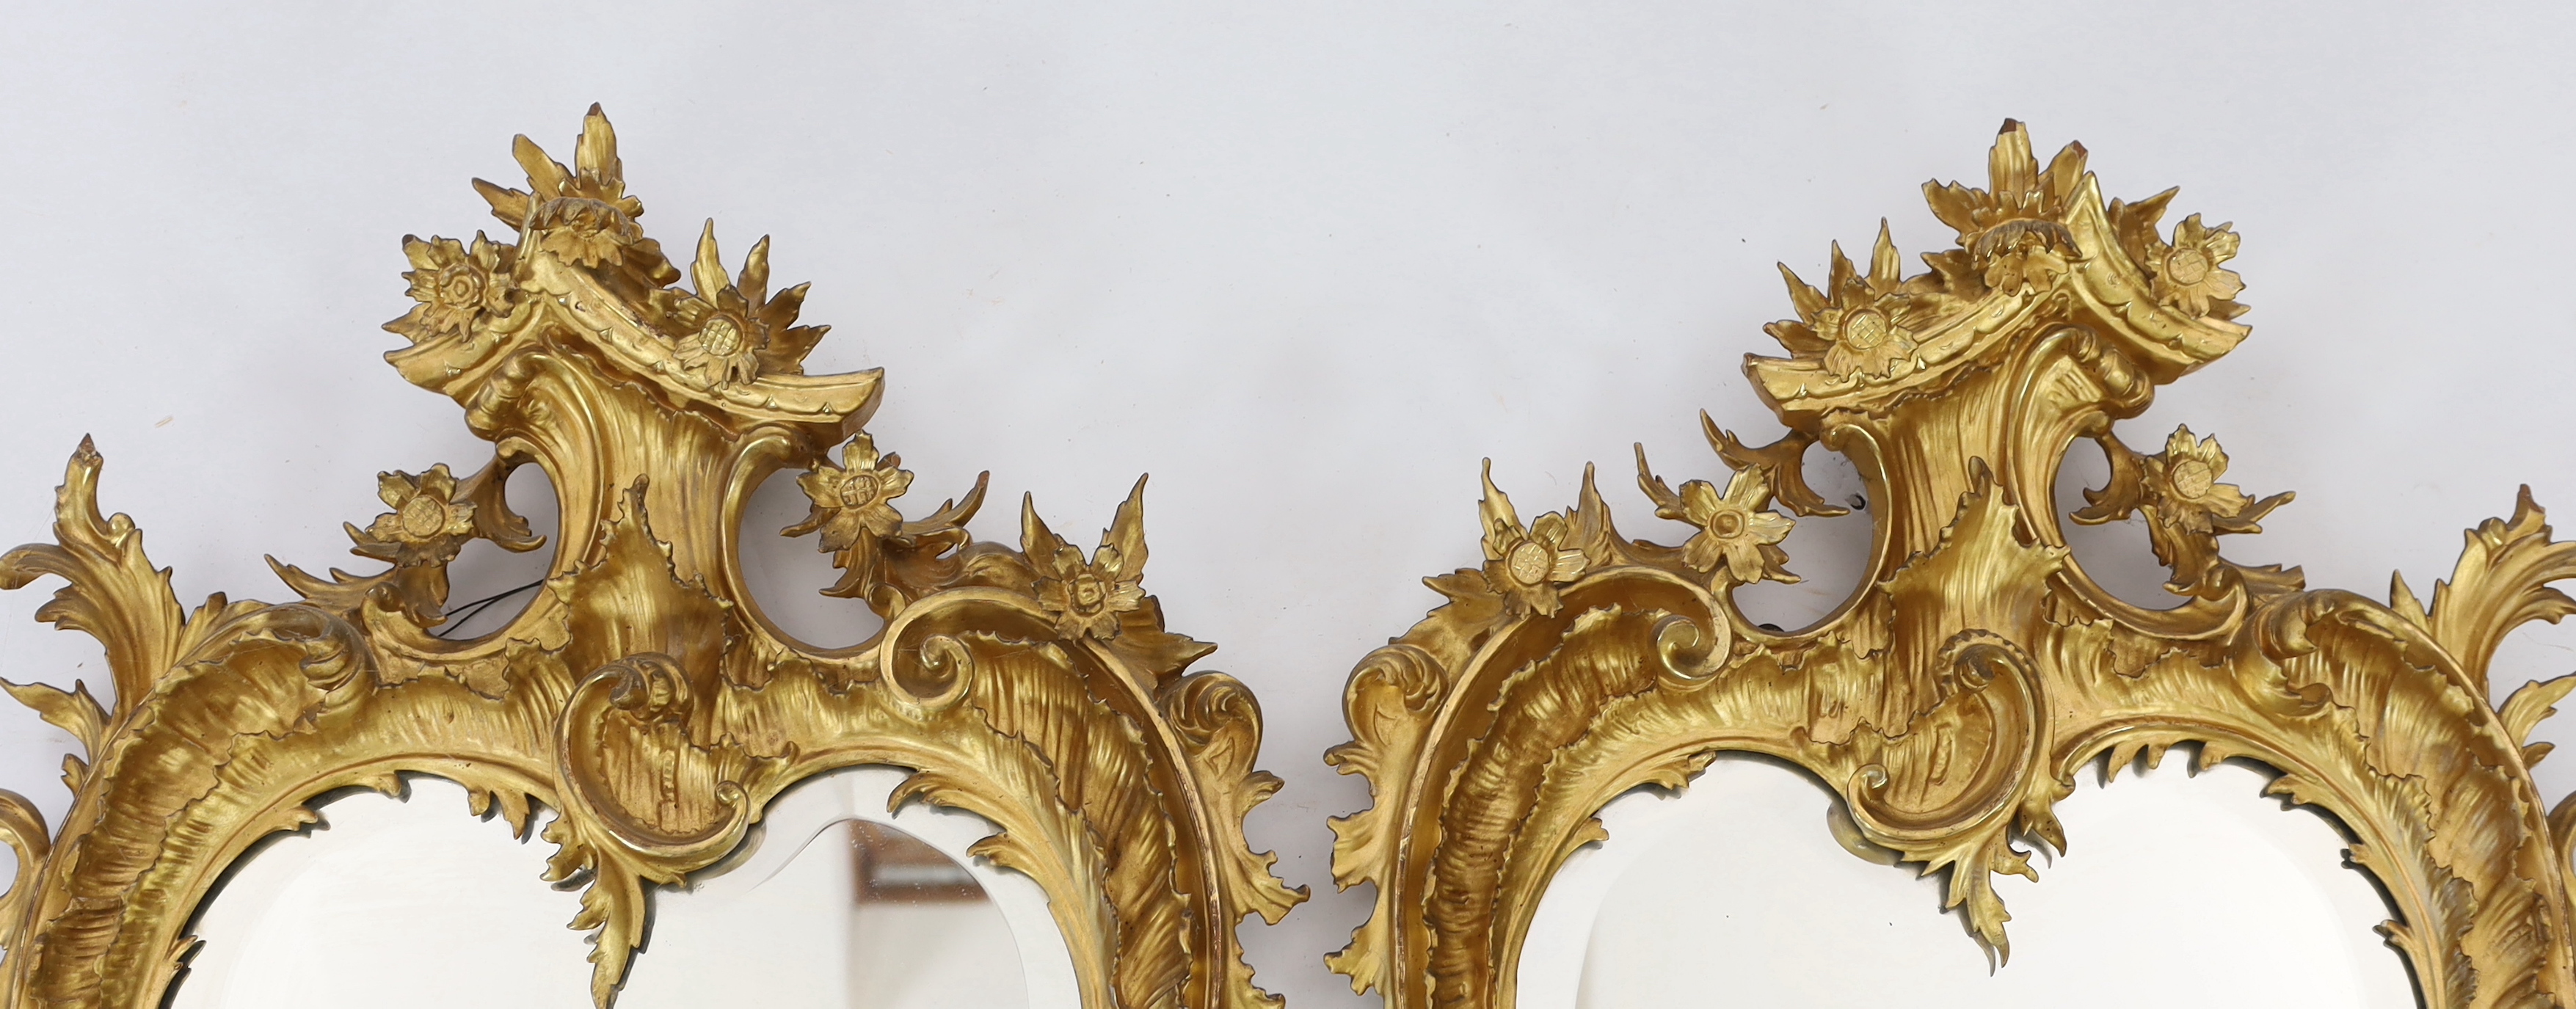 A pair of 19th century carved giltwood wall mirrors in the Rococo style, width 57cm, height 96cm